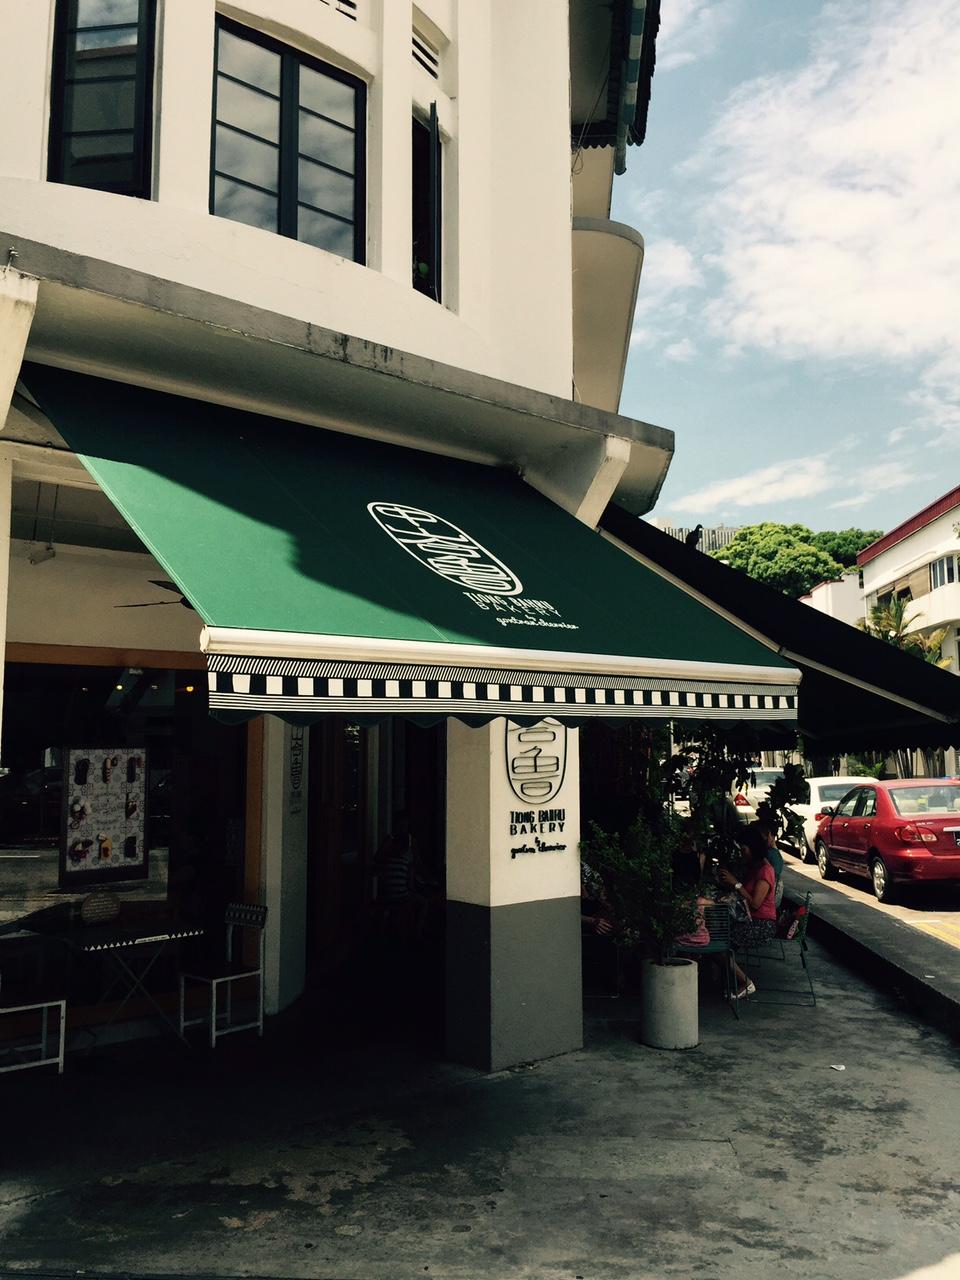 Cover image of this place Tiong Bahru Bakery